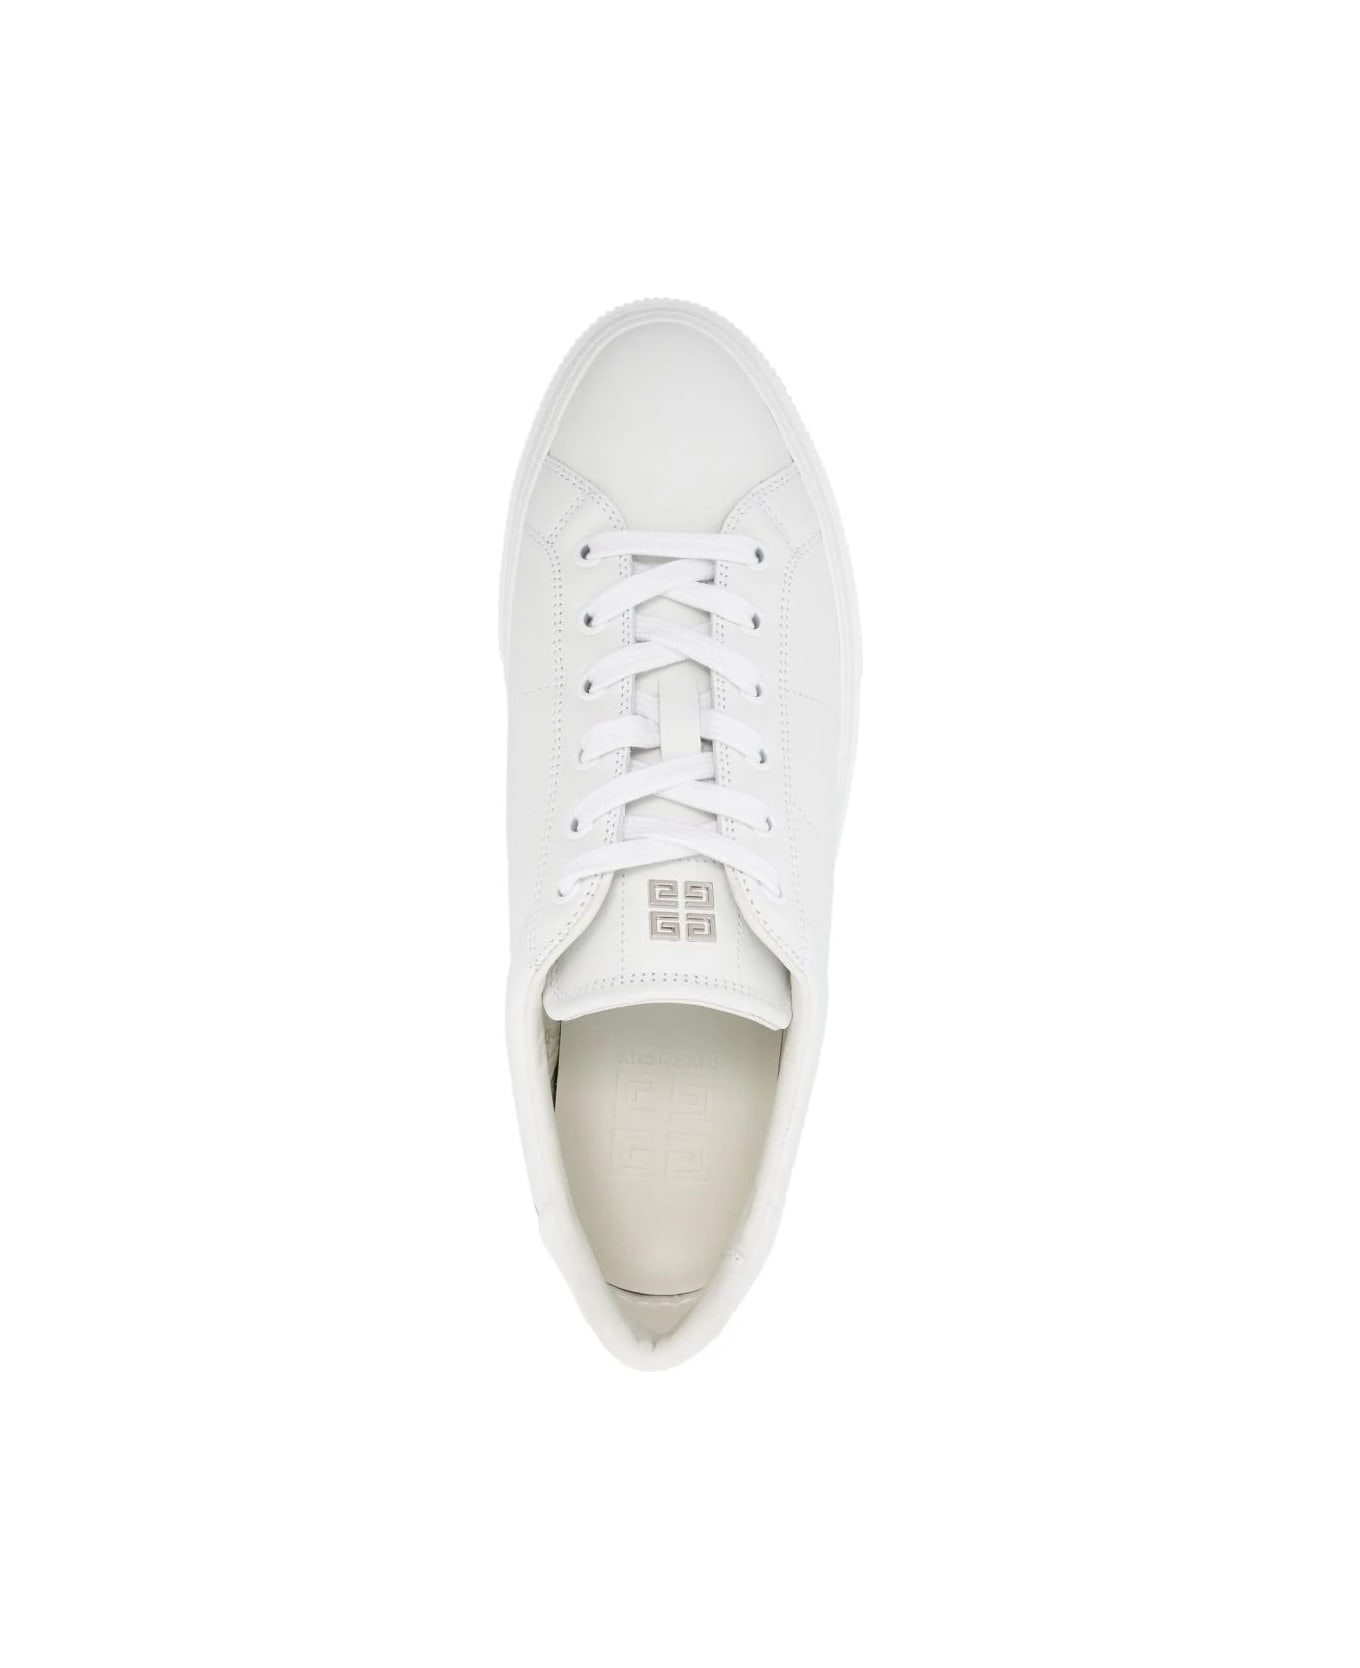 Givenchy Stone Grey City Sport Sneakers With Printed Logo - White スニーカー